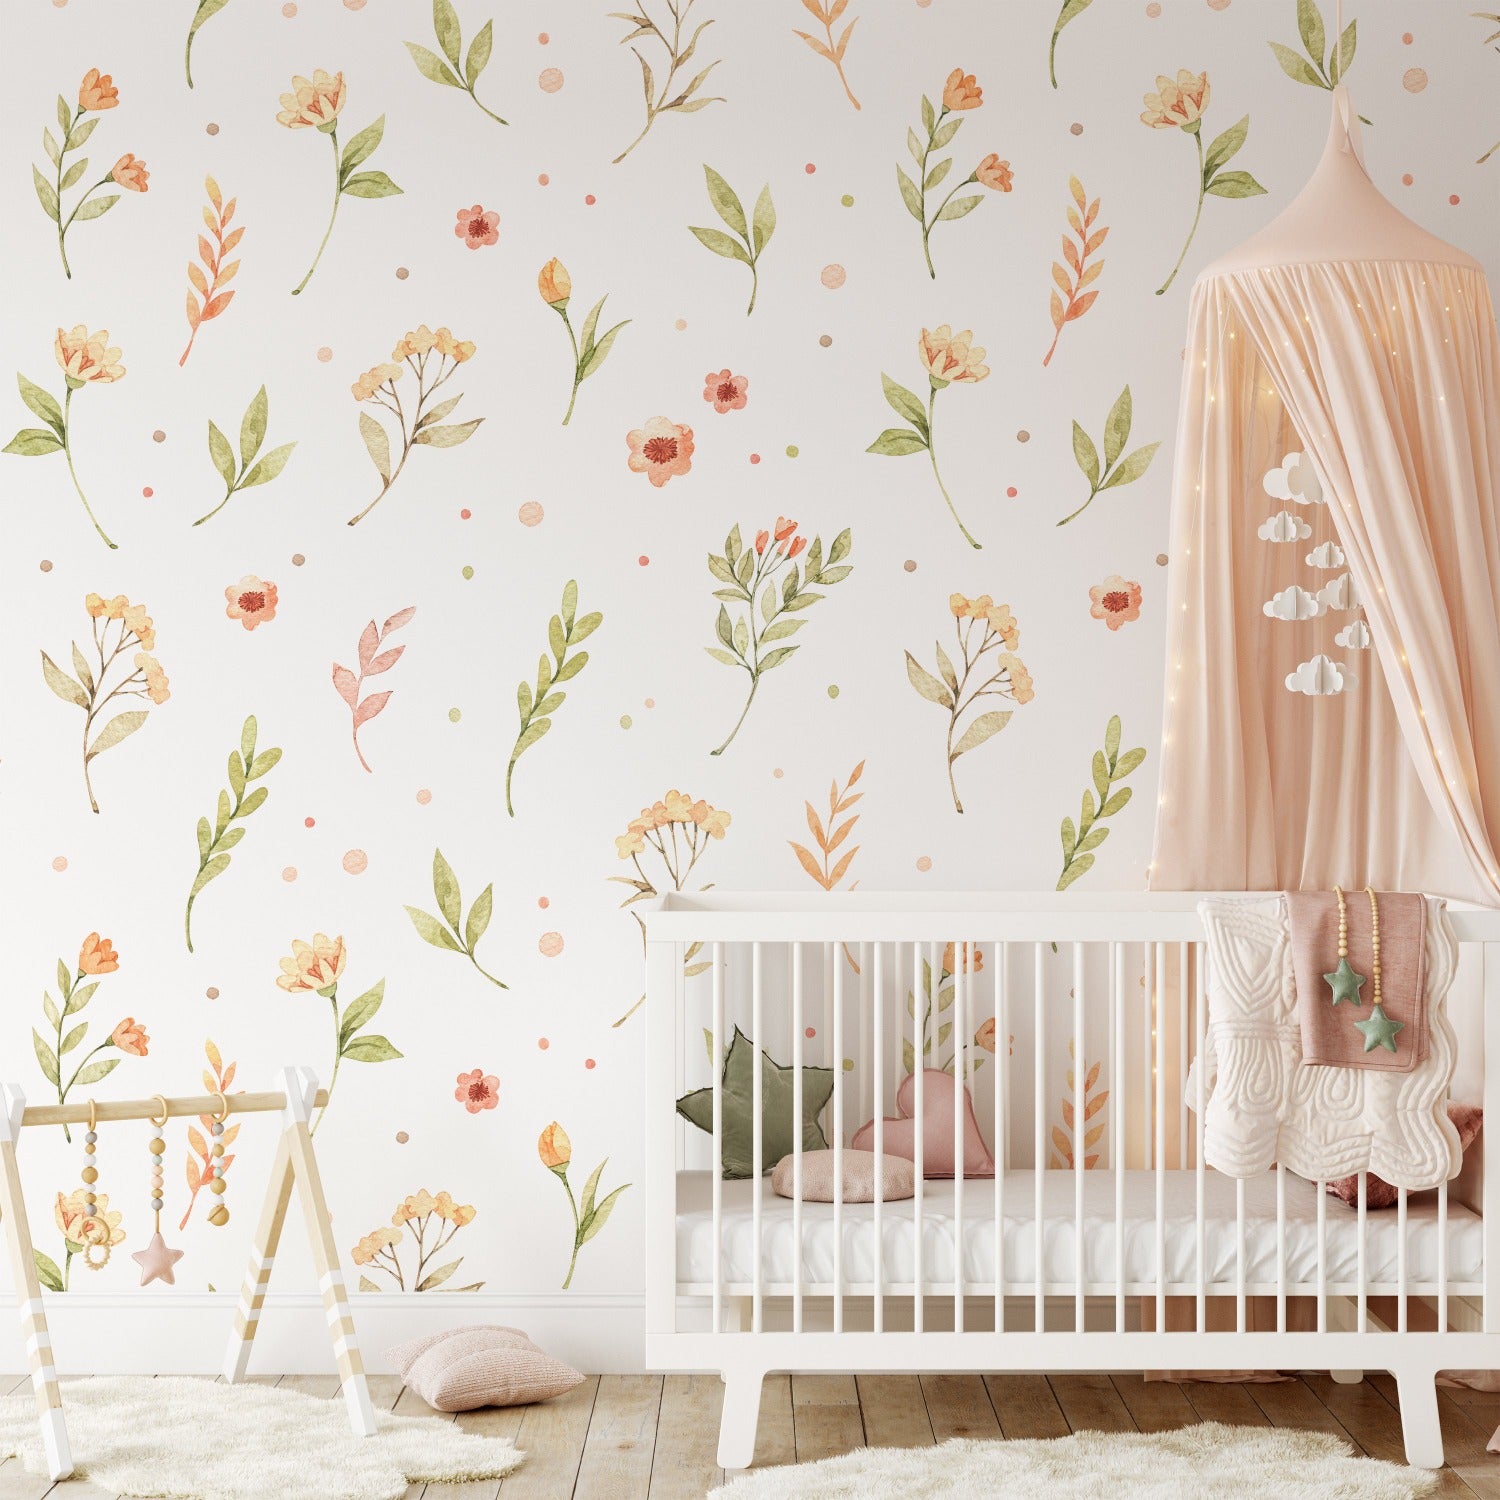 Kids Room Peel and Stick Wallpaper  Removable Self Adhesive